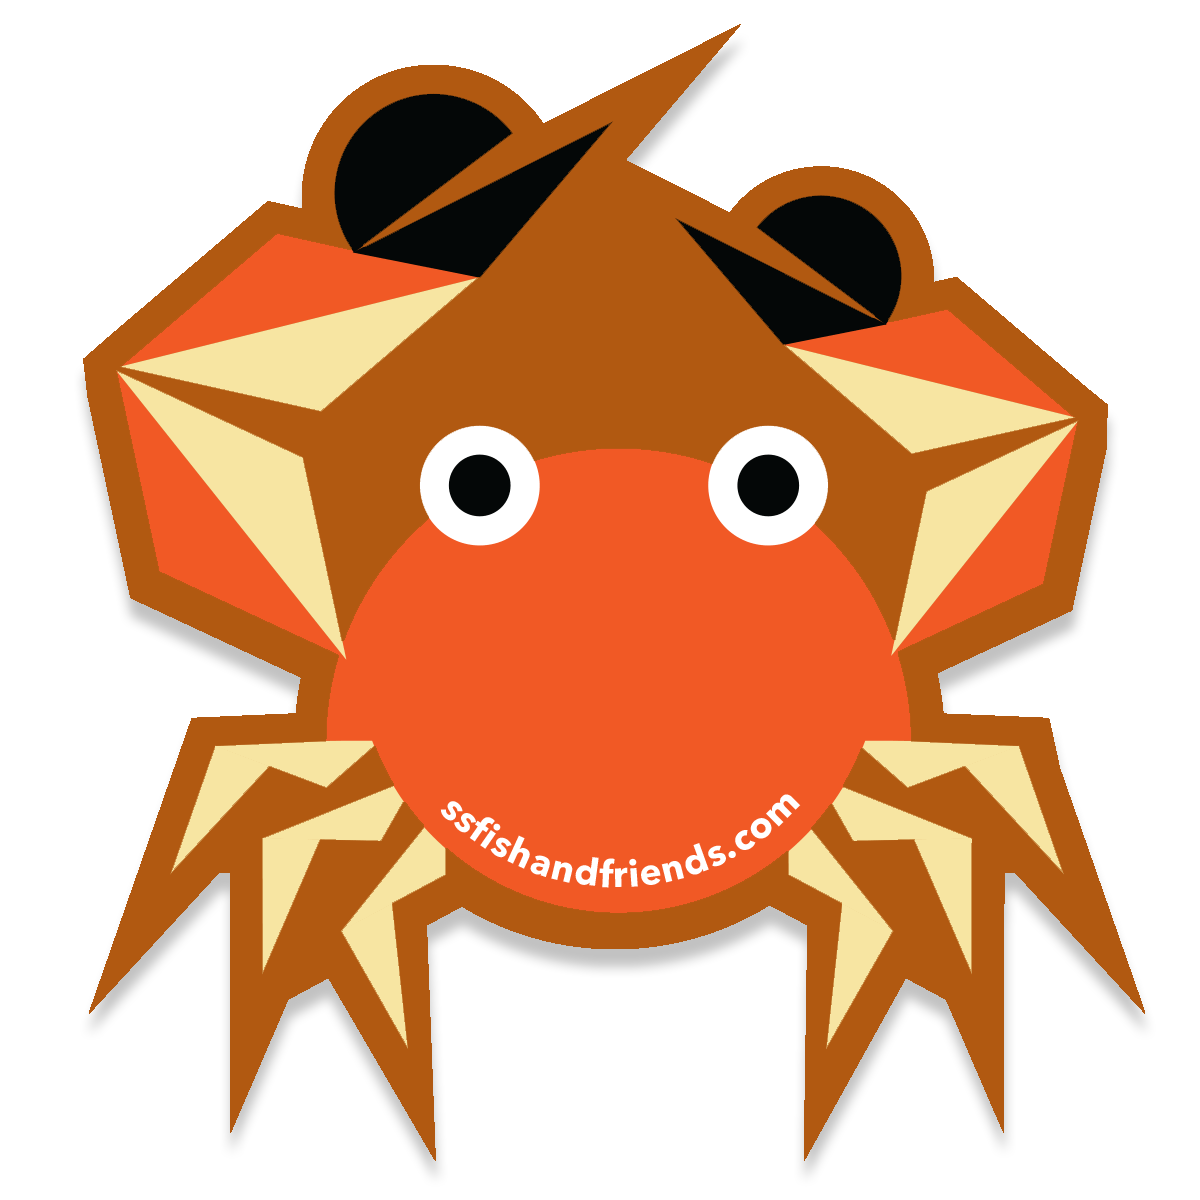 3" ShapeShifter Fish and Friends Crab Vinyl Sticker